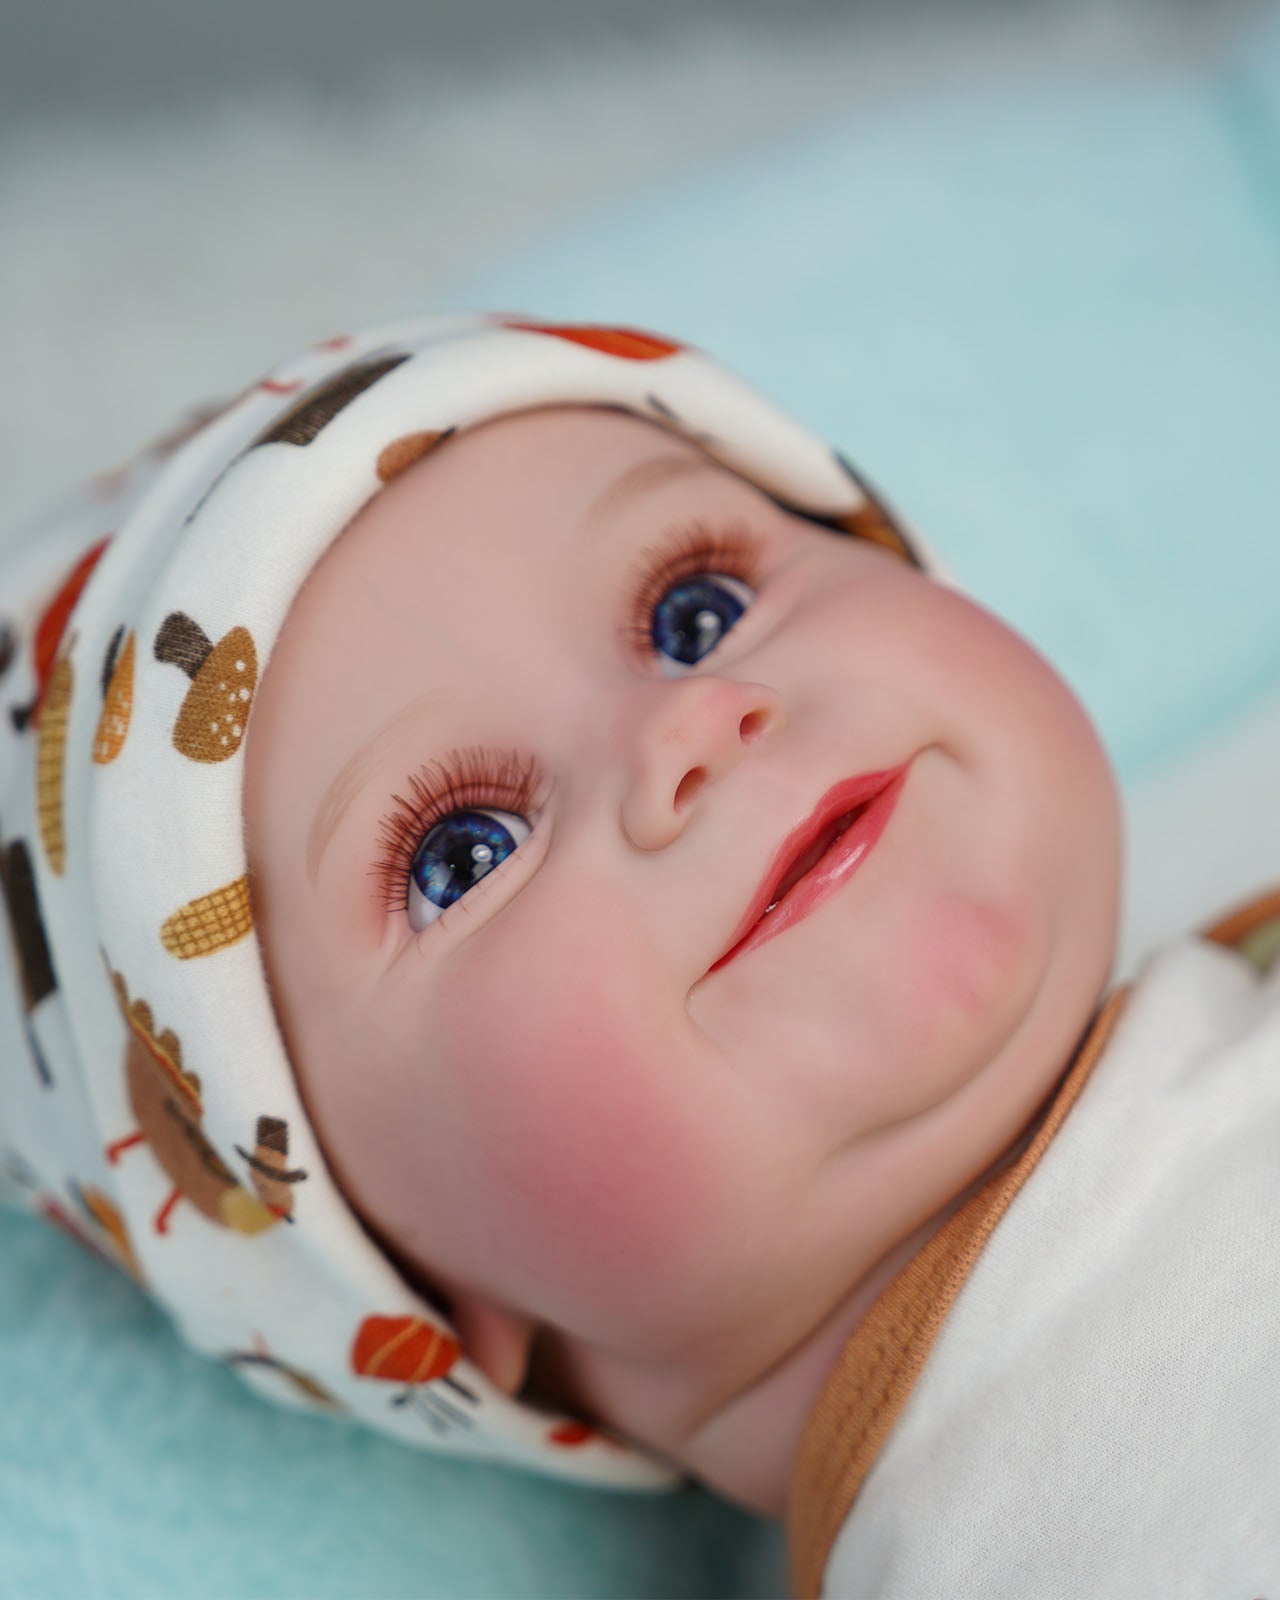 Babs - 24" Reborn Baby Dolls Cute Toddlers Girl with Joyful and Radiant Smile